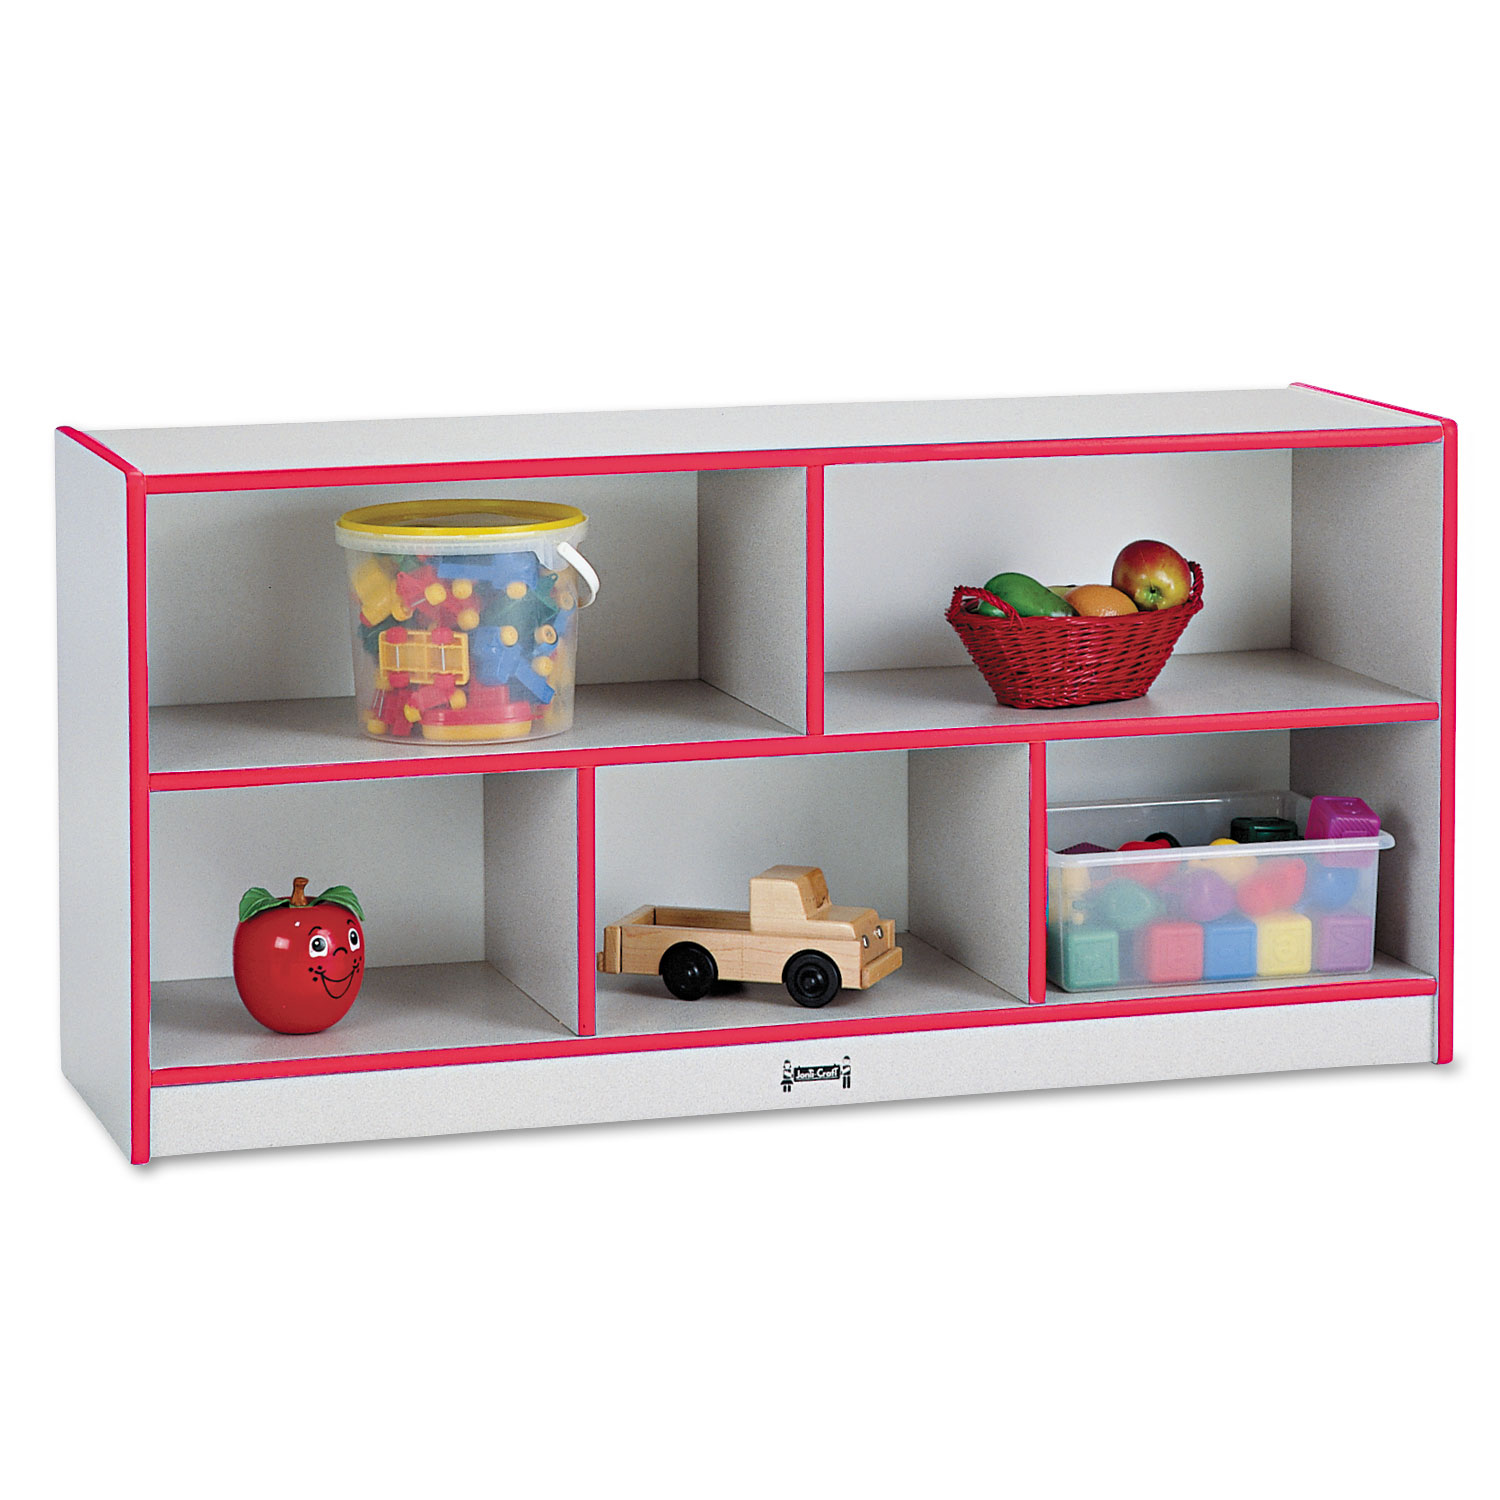 Rainbow Accents Single Storage Units, 48w x 15d x 24-1/2h, Red/Freckled Gray